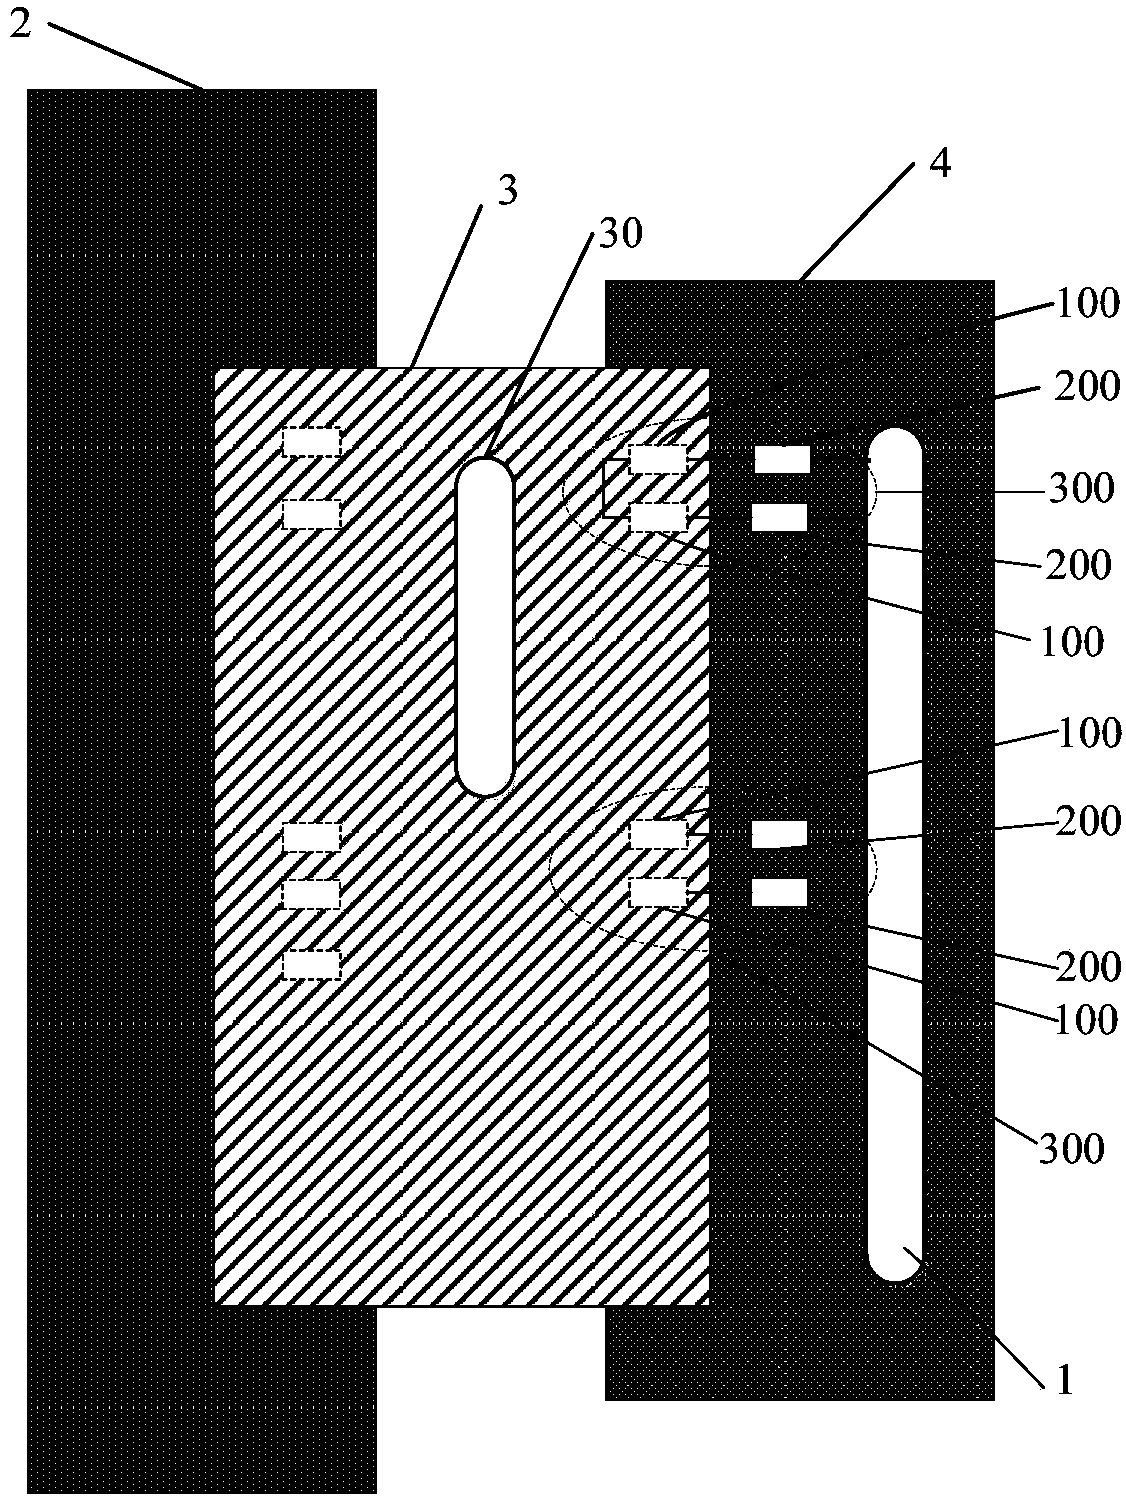 Bonding impedance detecting system and method